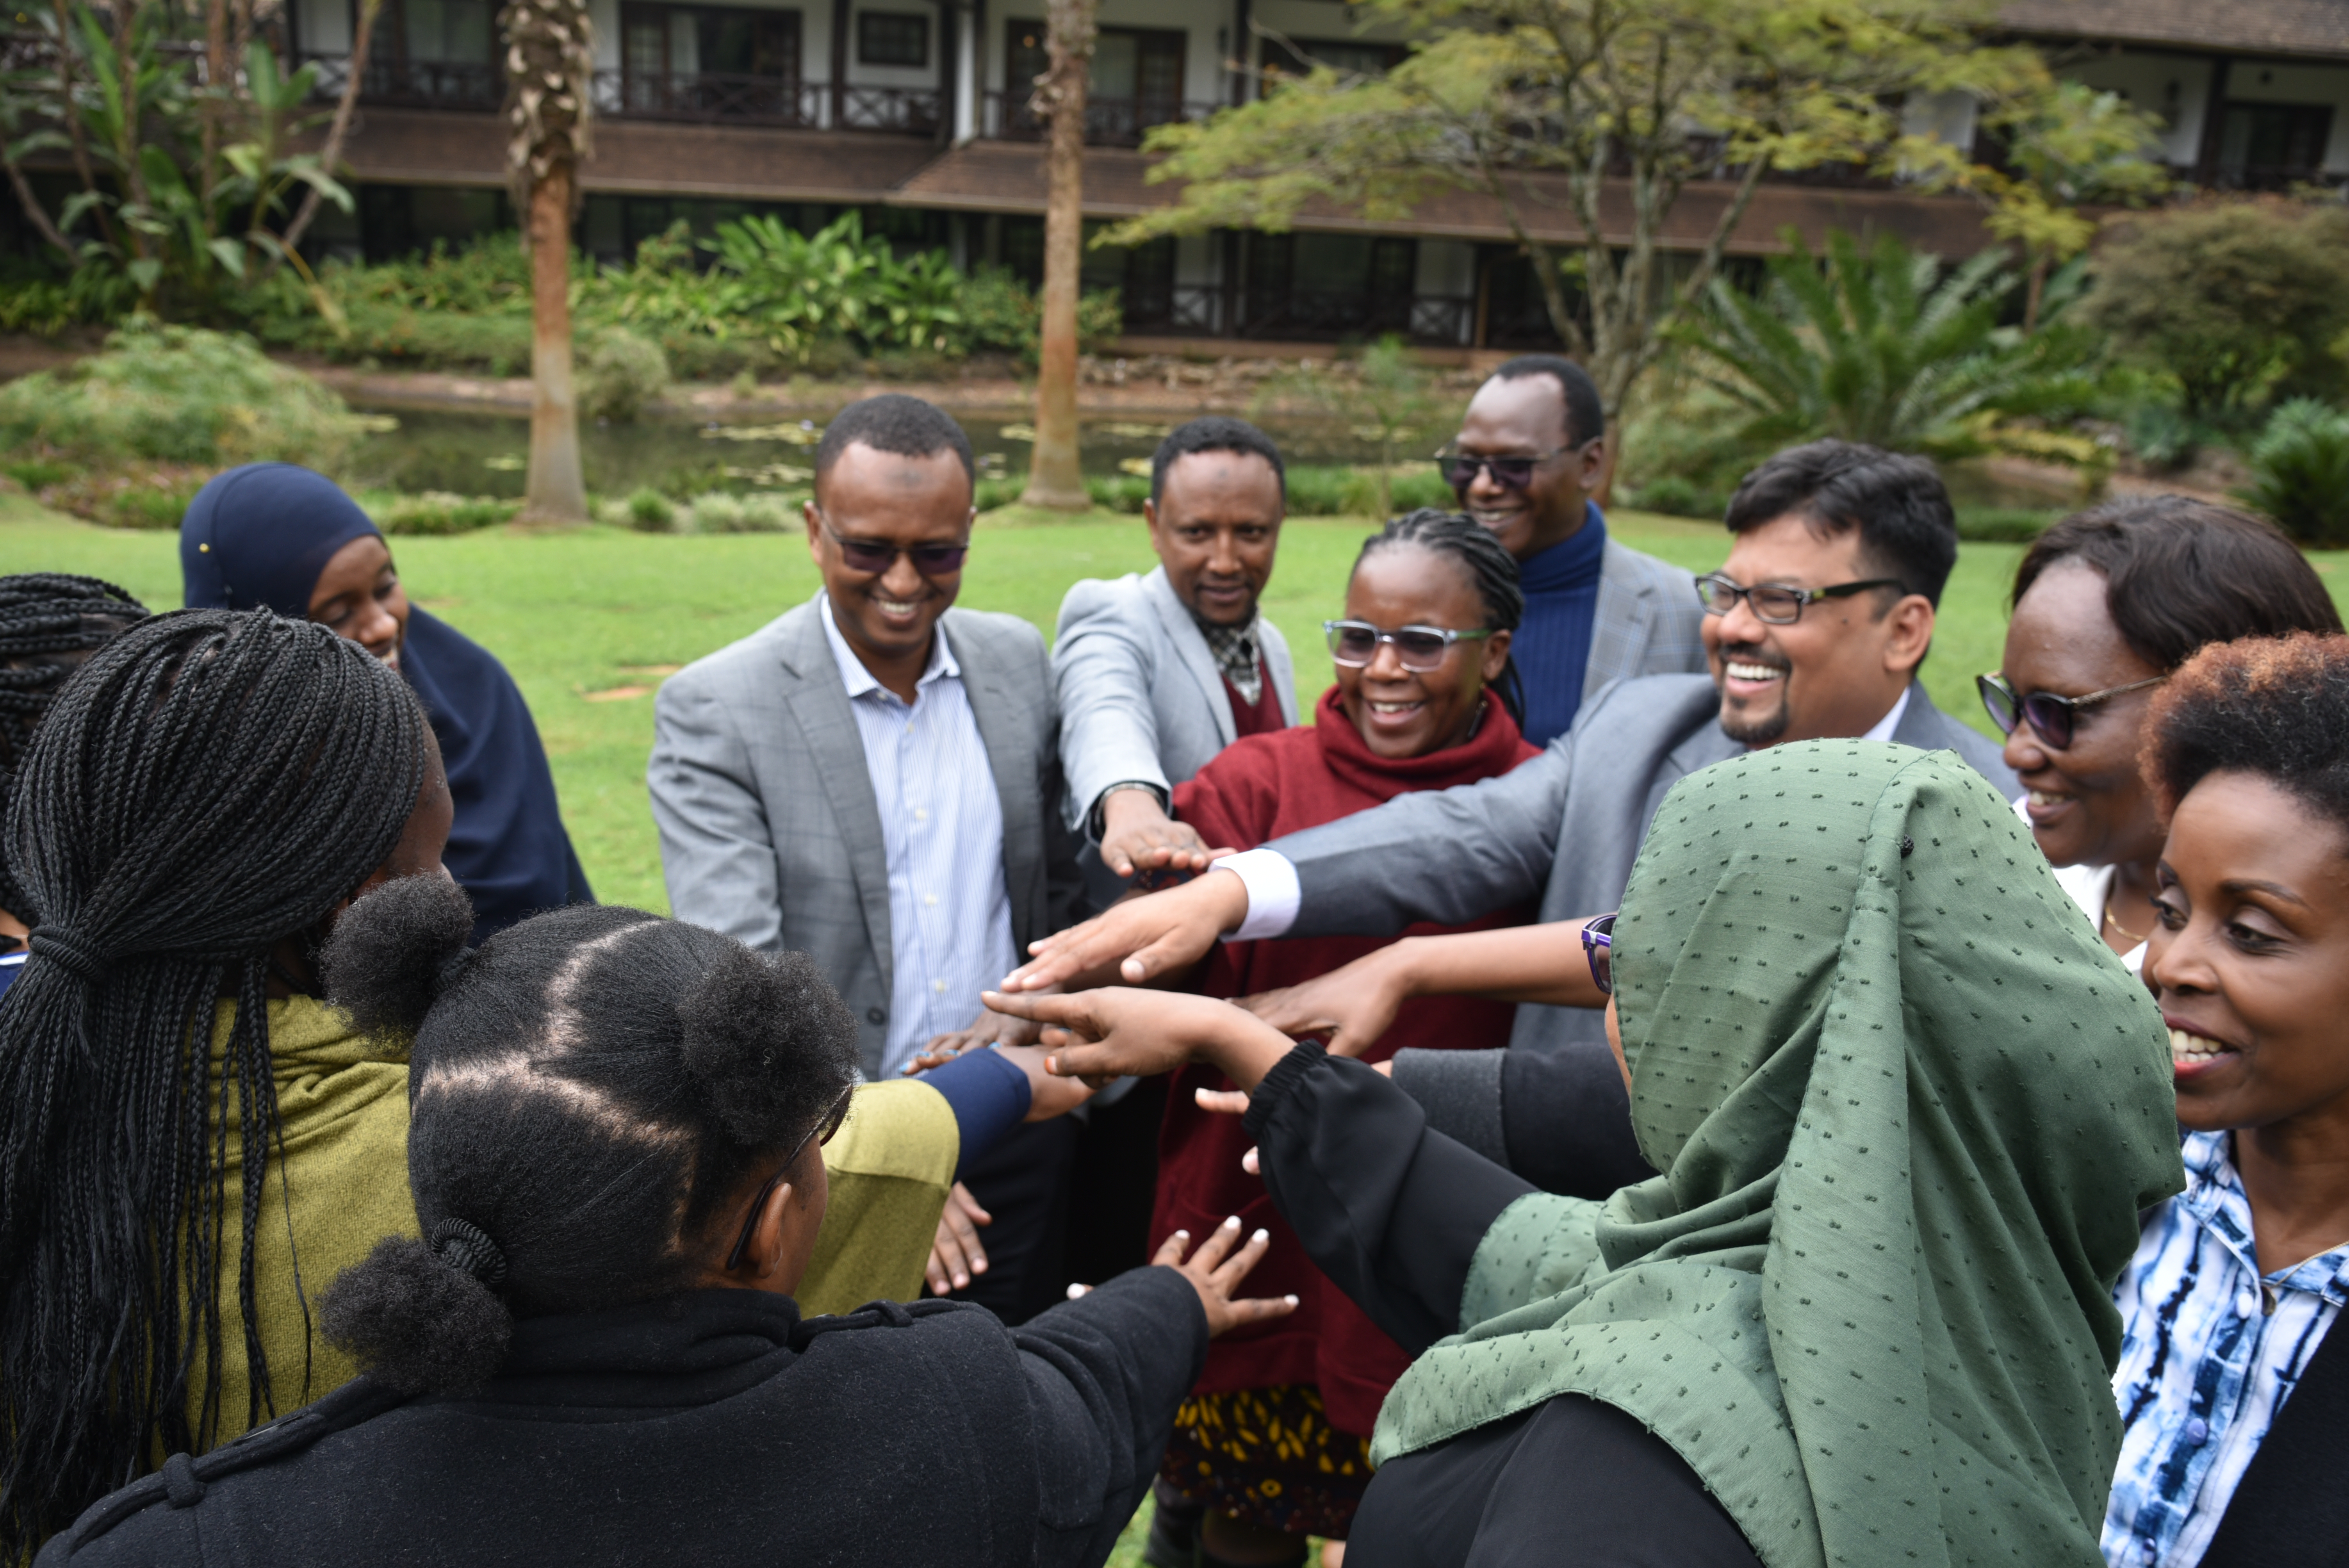 UN Somalia GTG members engage in team building exercises during the retreat. Photo: UN Women/Adelaide Malweyi